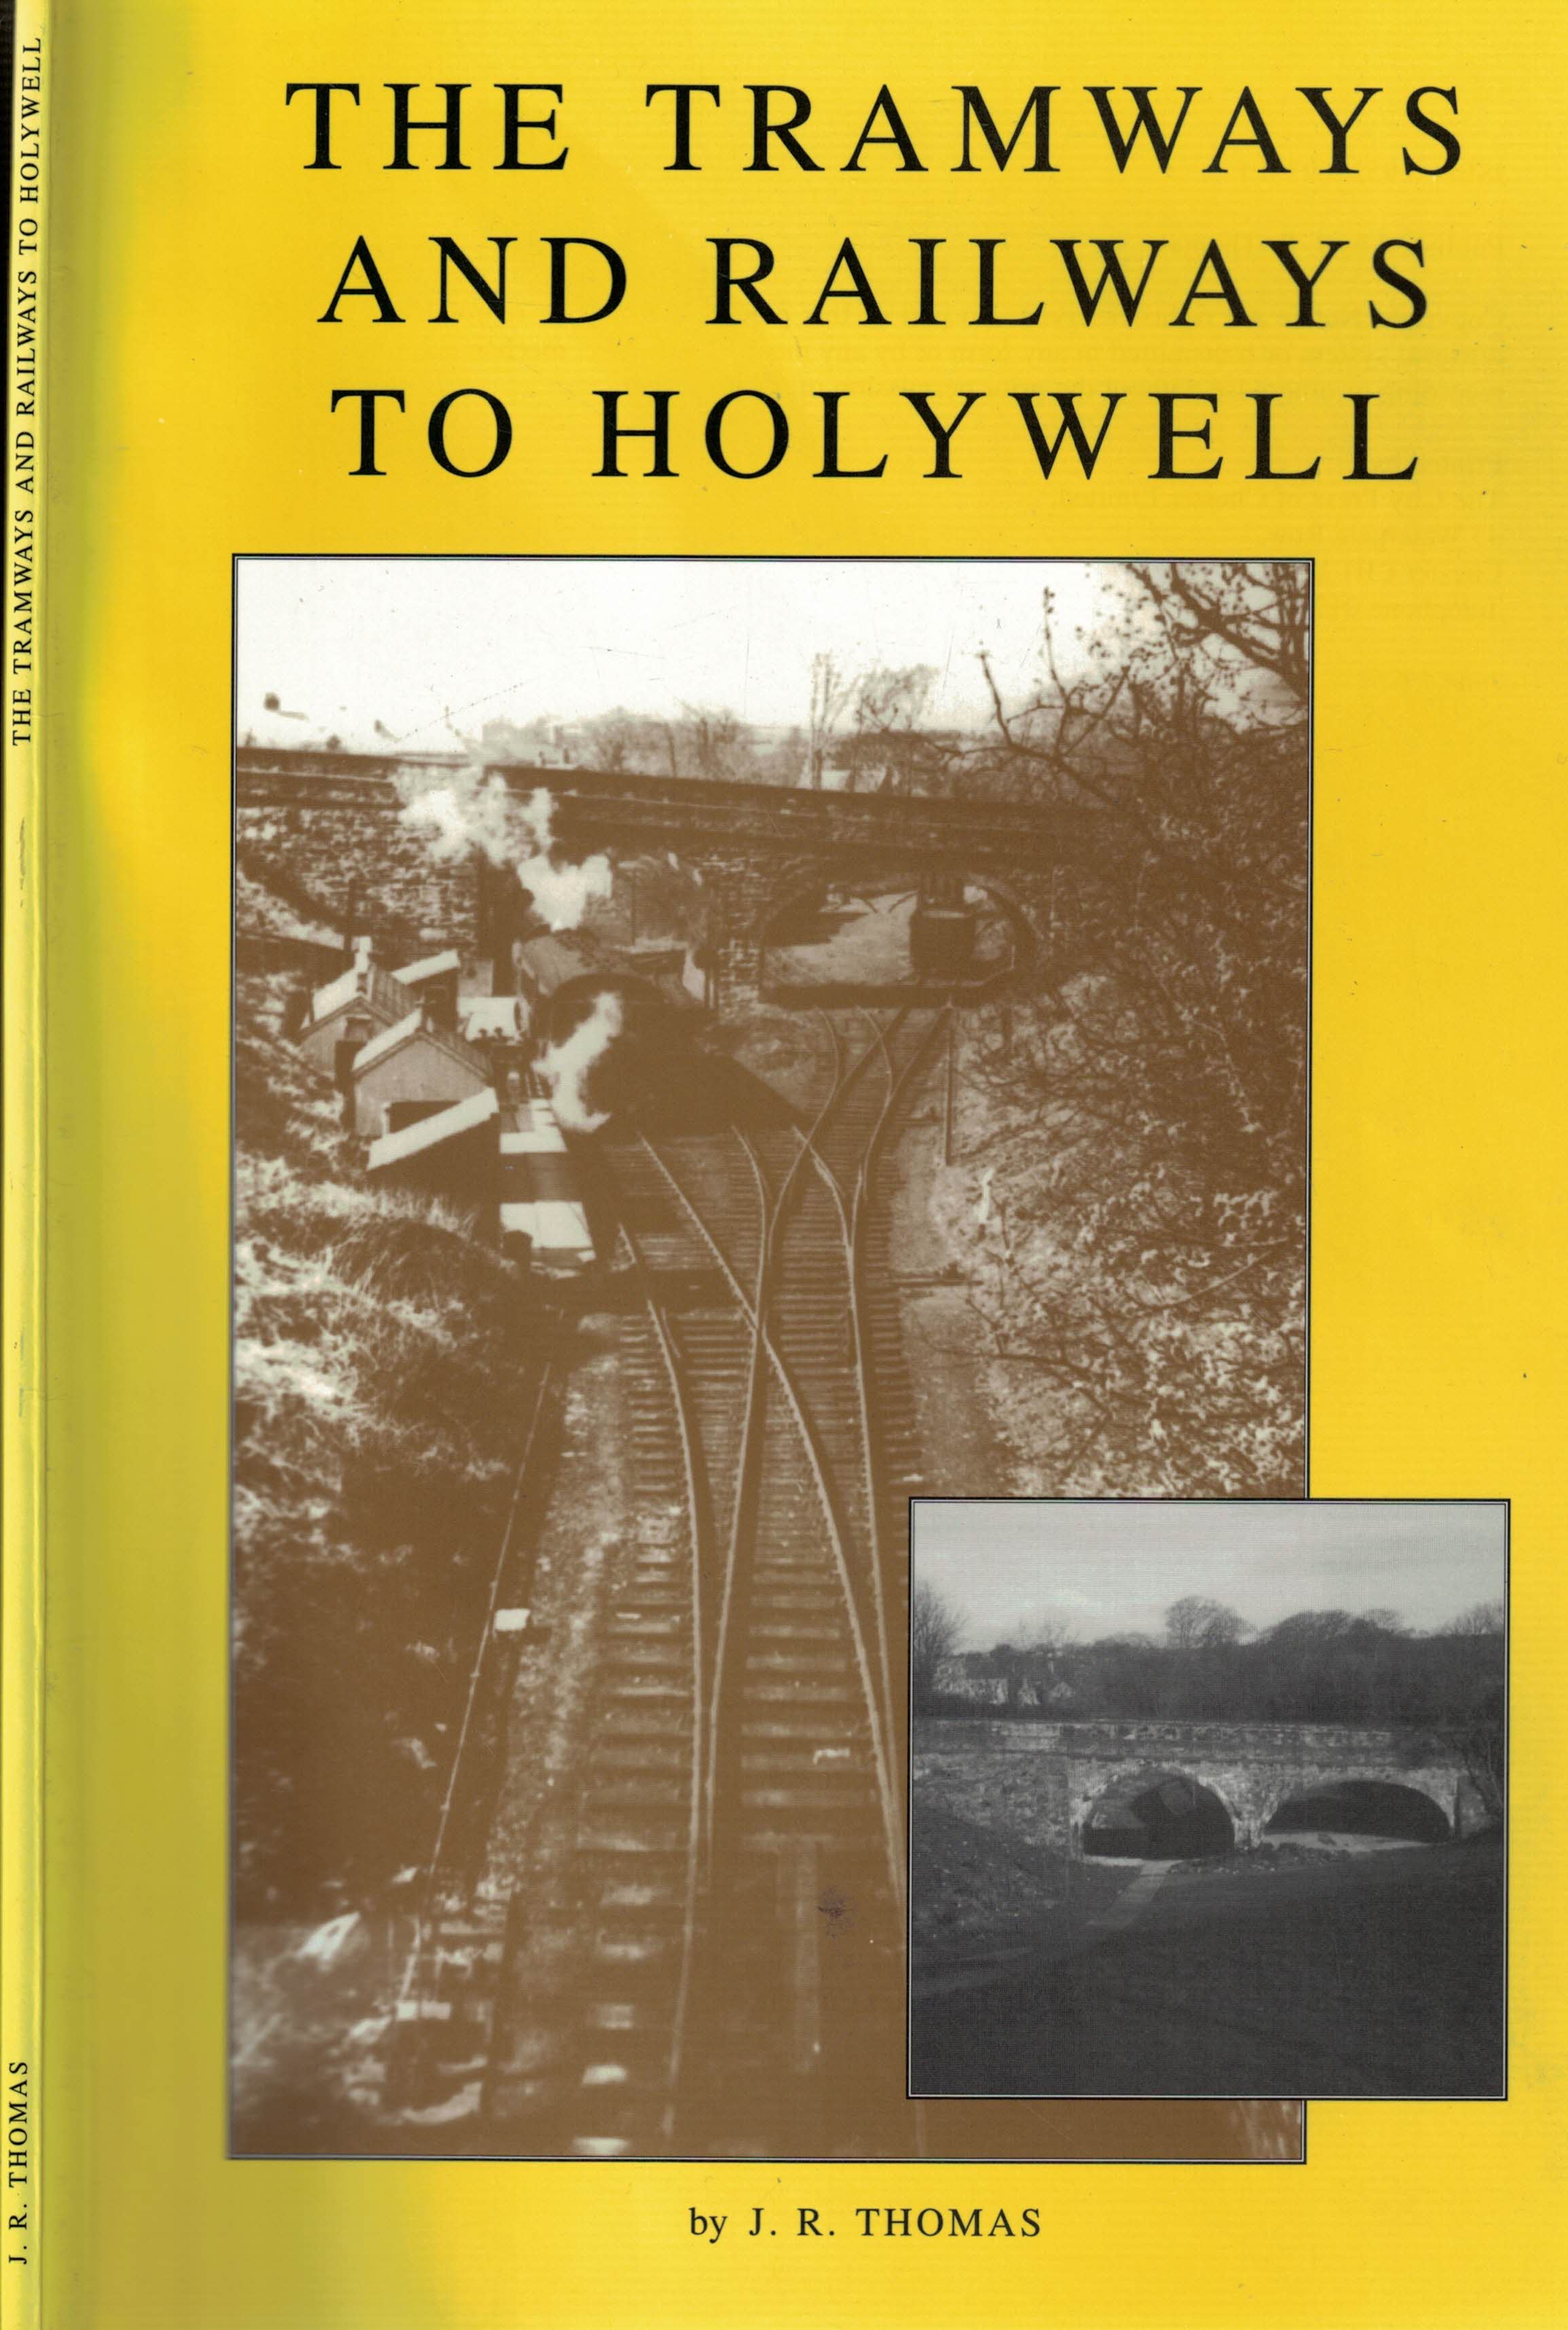 The Tramways and Railways of Holywell